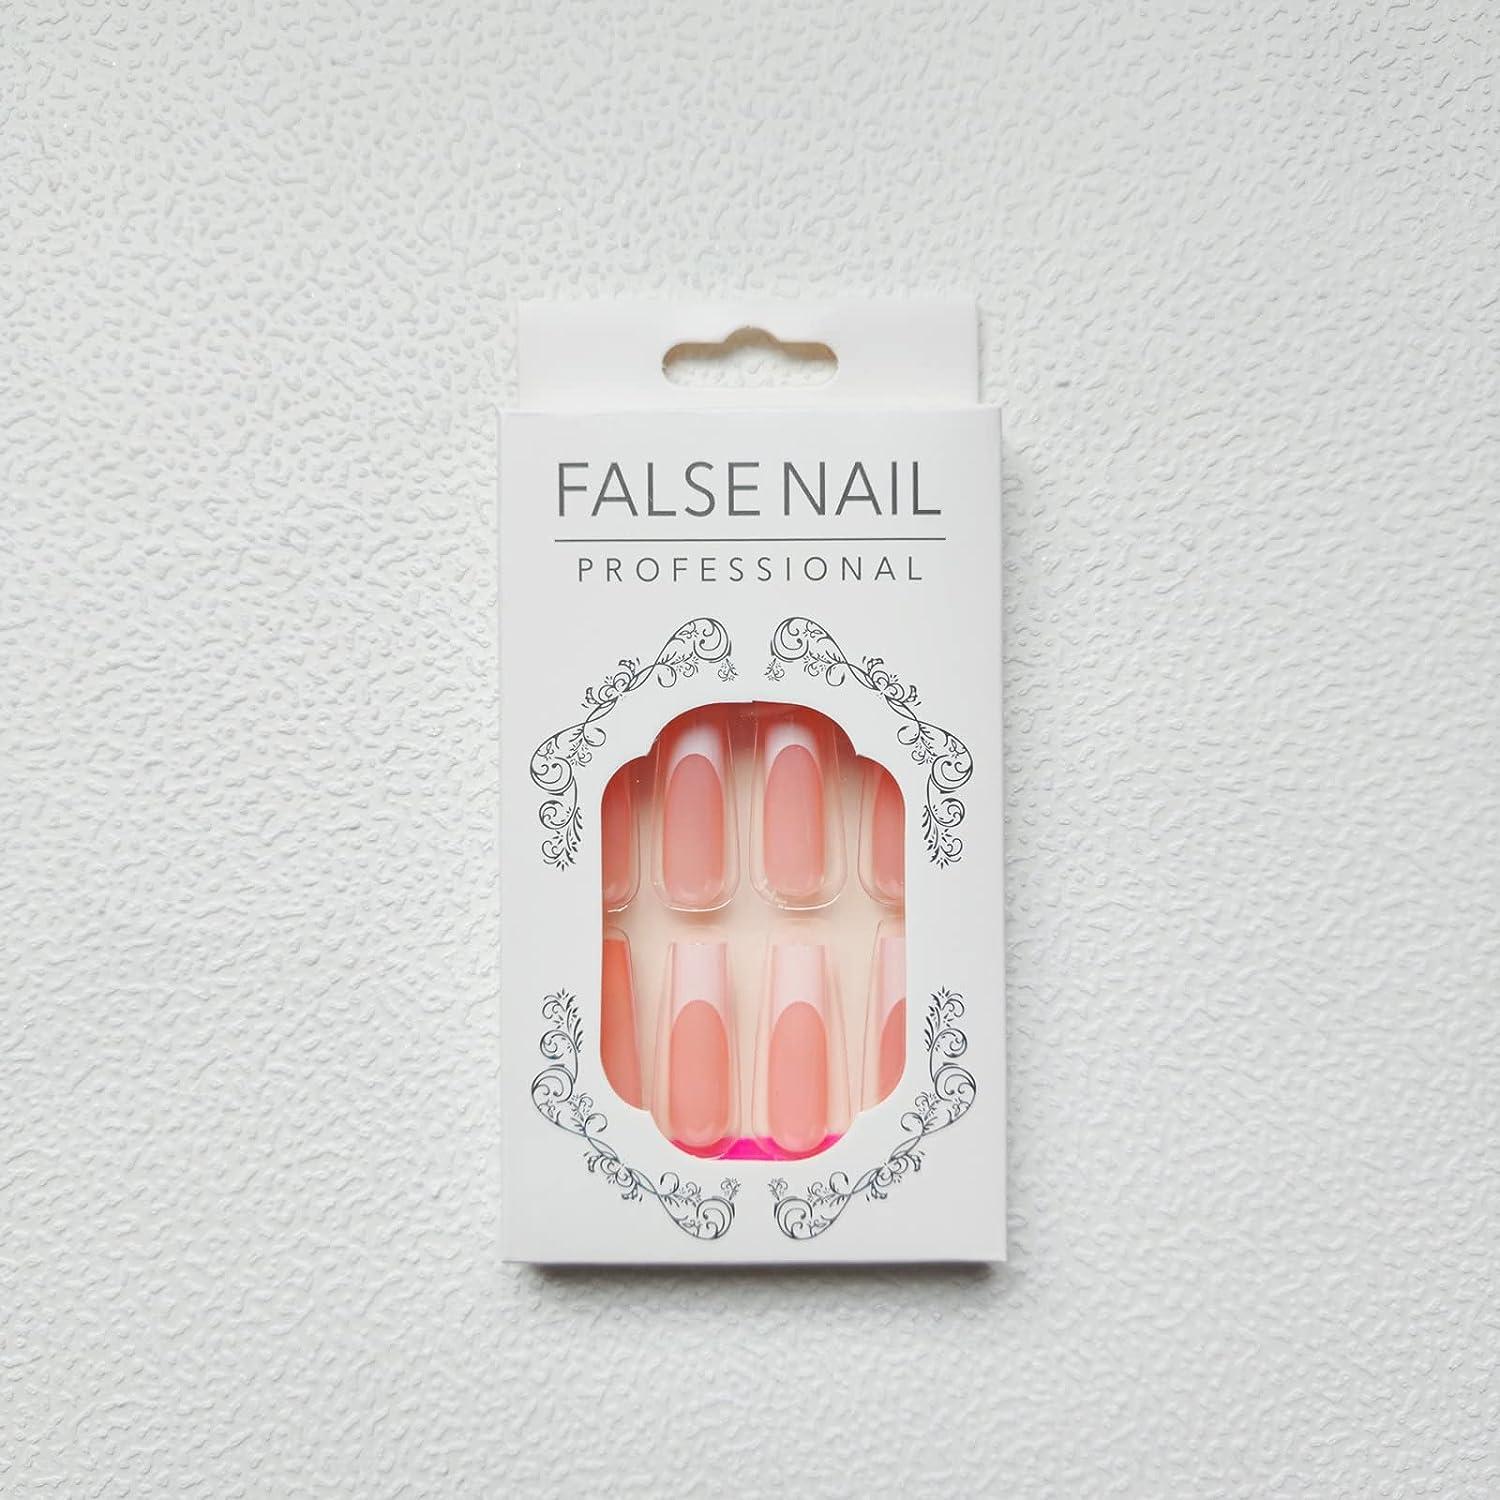 4 Simple Ways to Make Fake Nails Stay on Longer - wikiHow